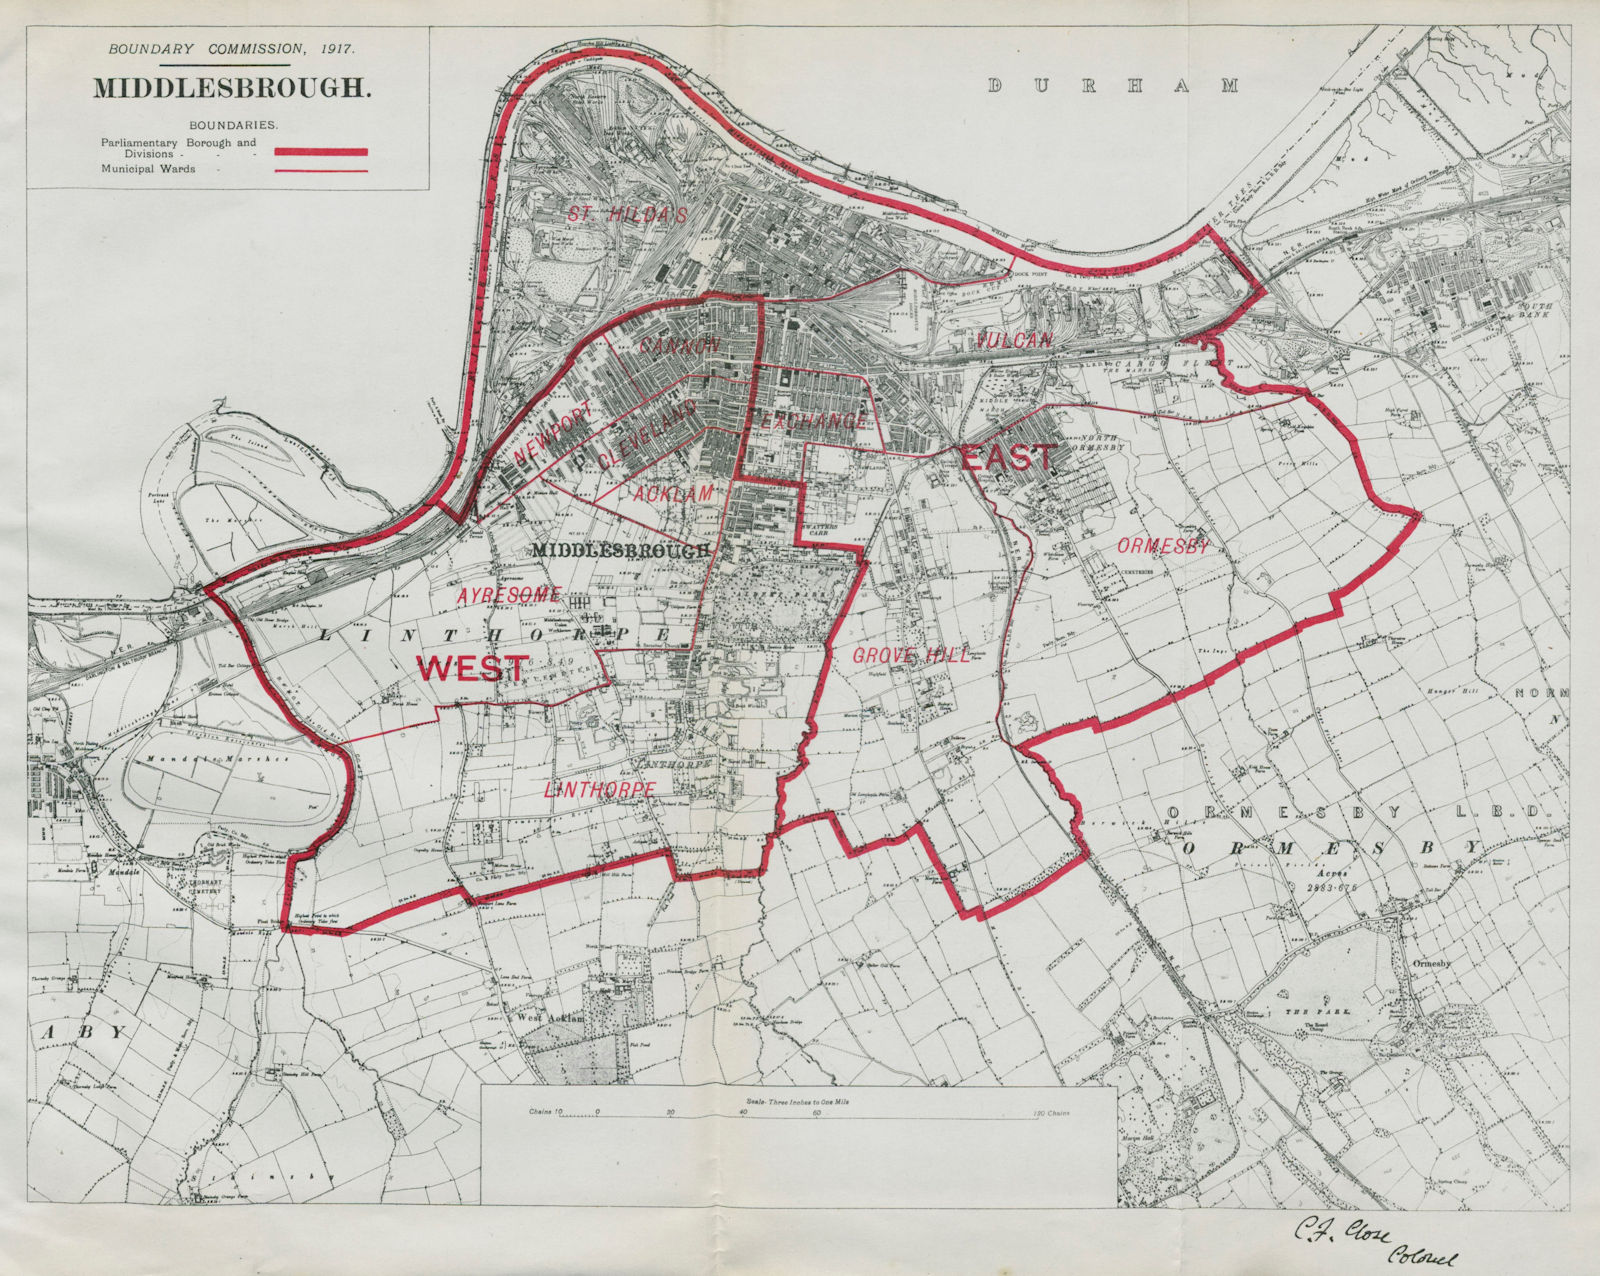 Middlesbrough Parliamentary Borough. Ormesby. BOUNDARY COMMISSION 1917 old map